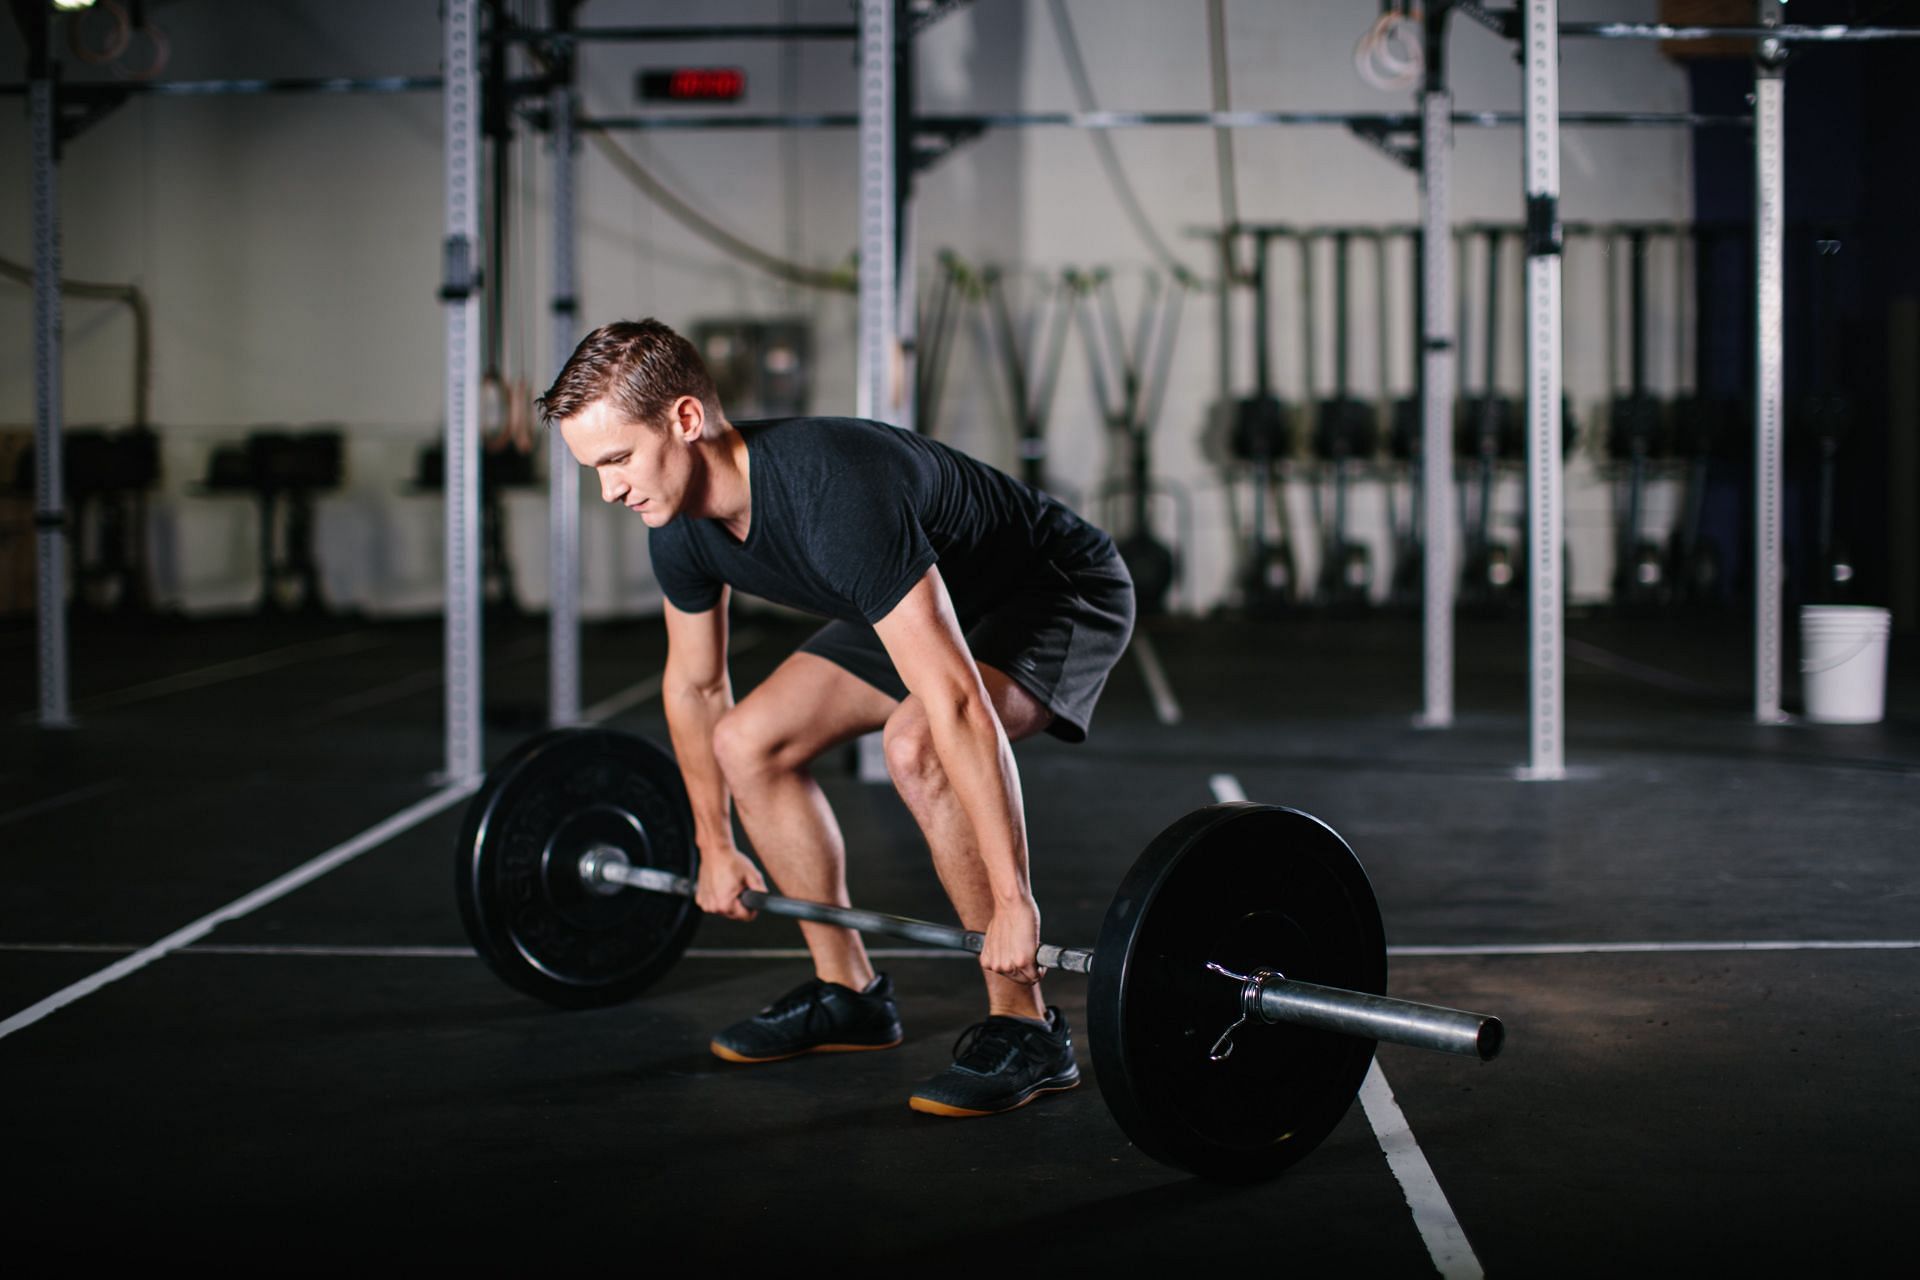 How to execute high-pull exercise effectively? (Image via Unsplash / Mariah krafft)